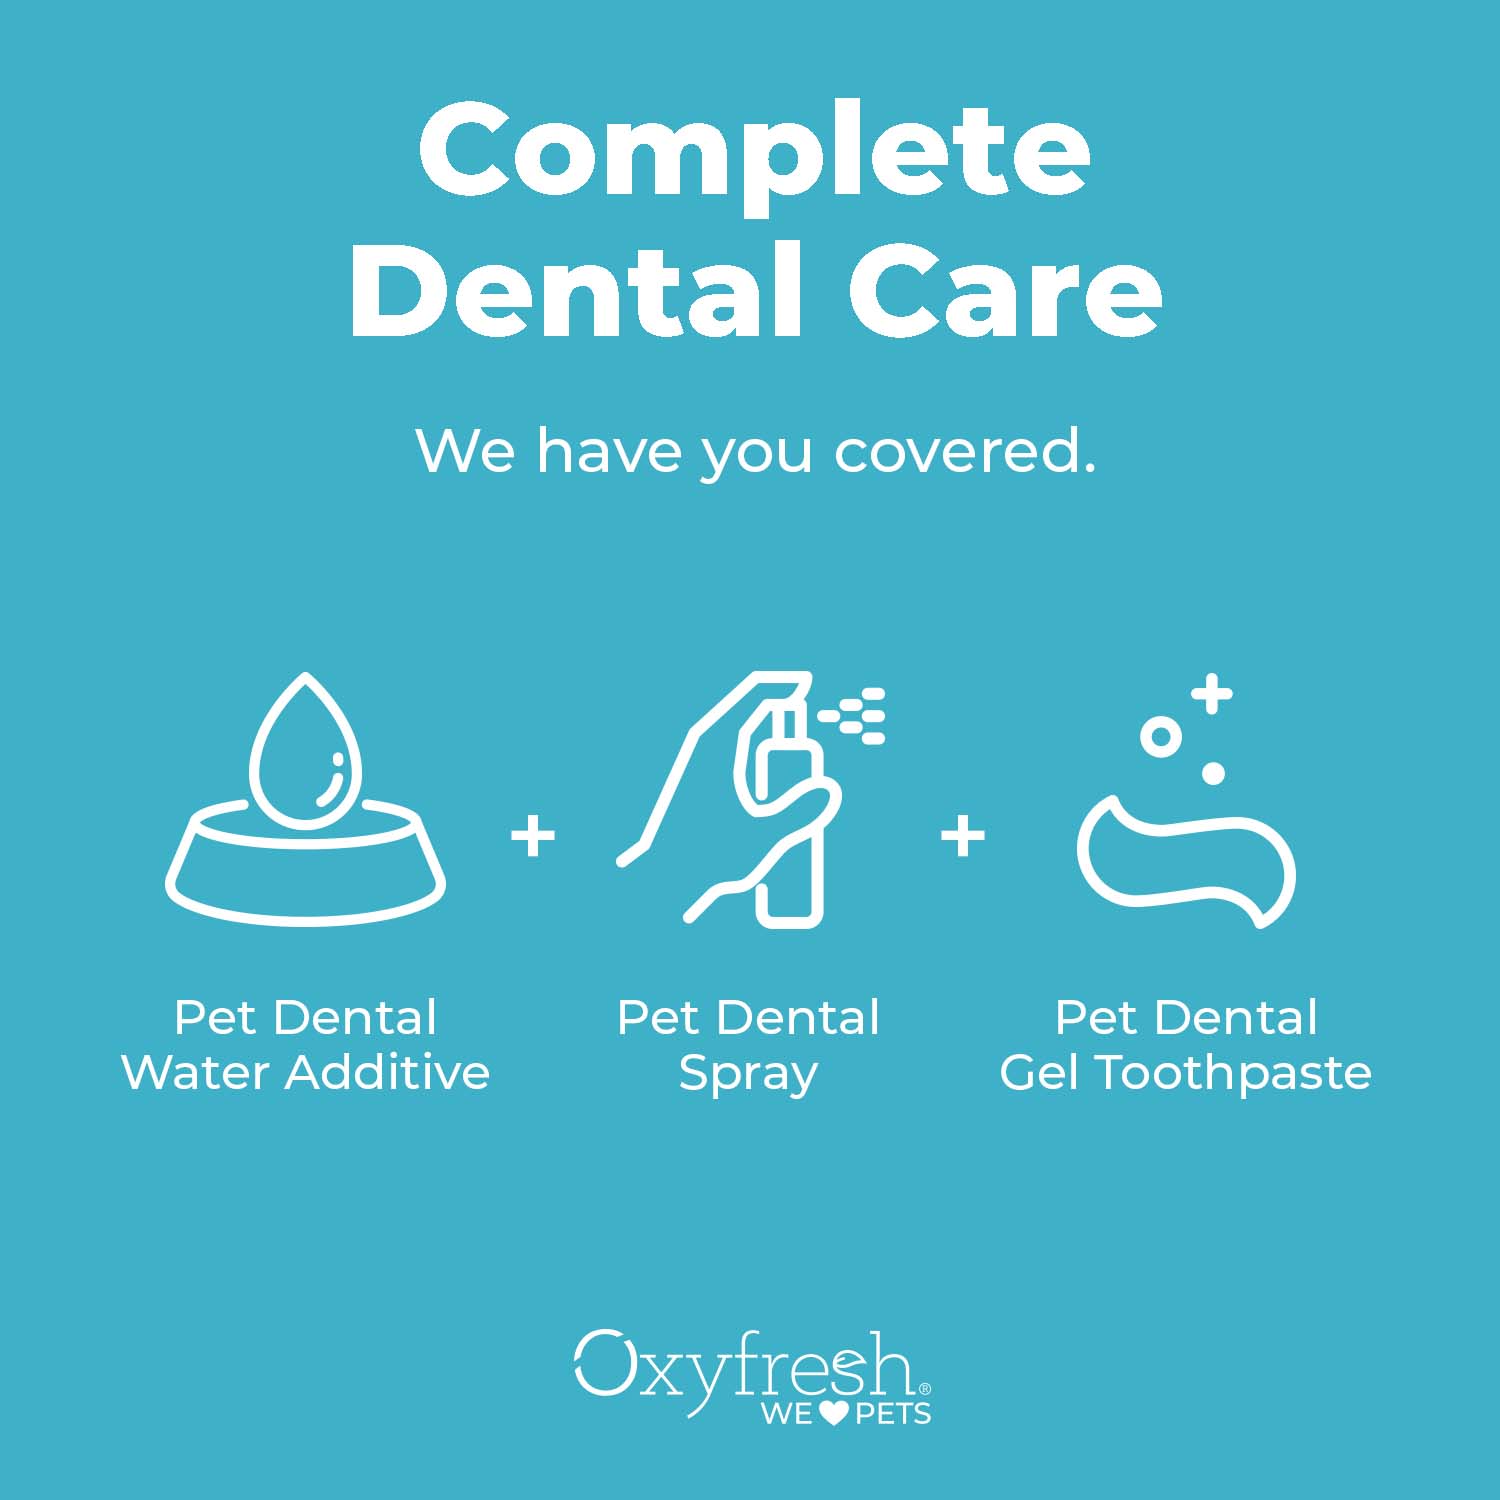 oxyfresh-pet-dental-complete-care-with-pet-dental-water-additive-pet-dental-spray-and-pet-dental-gel-toothpaste